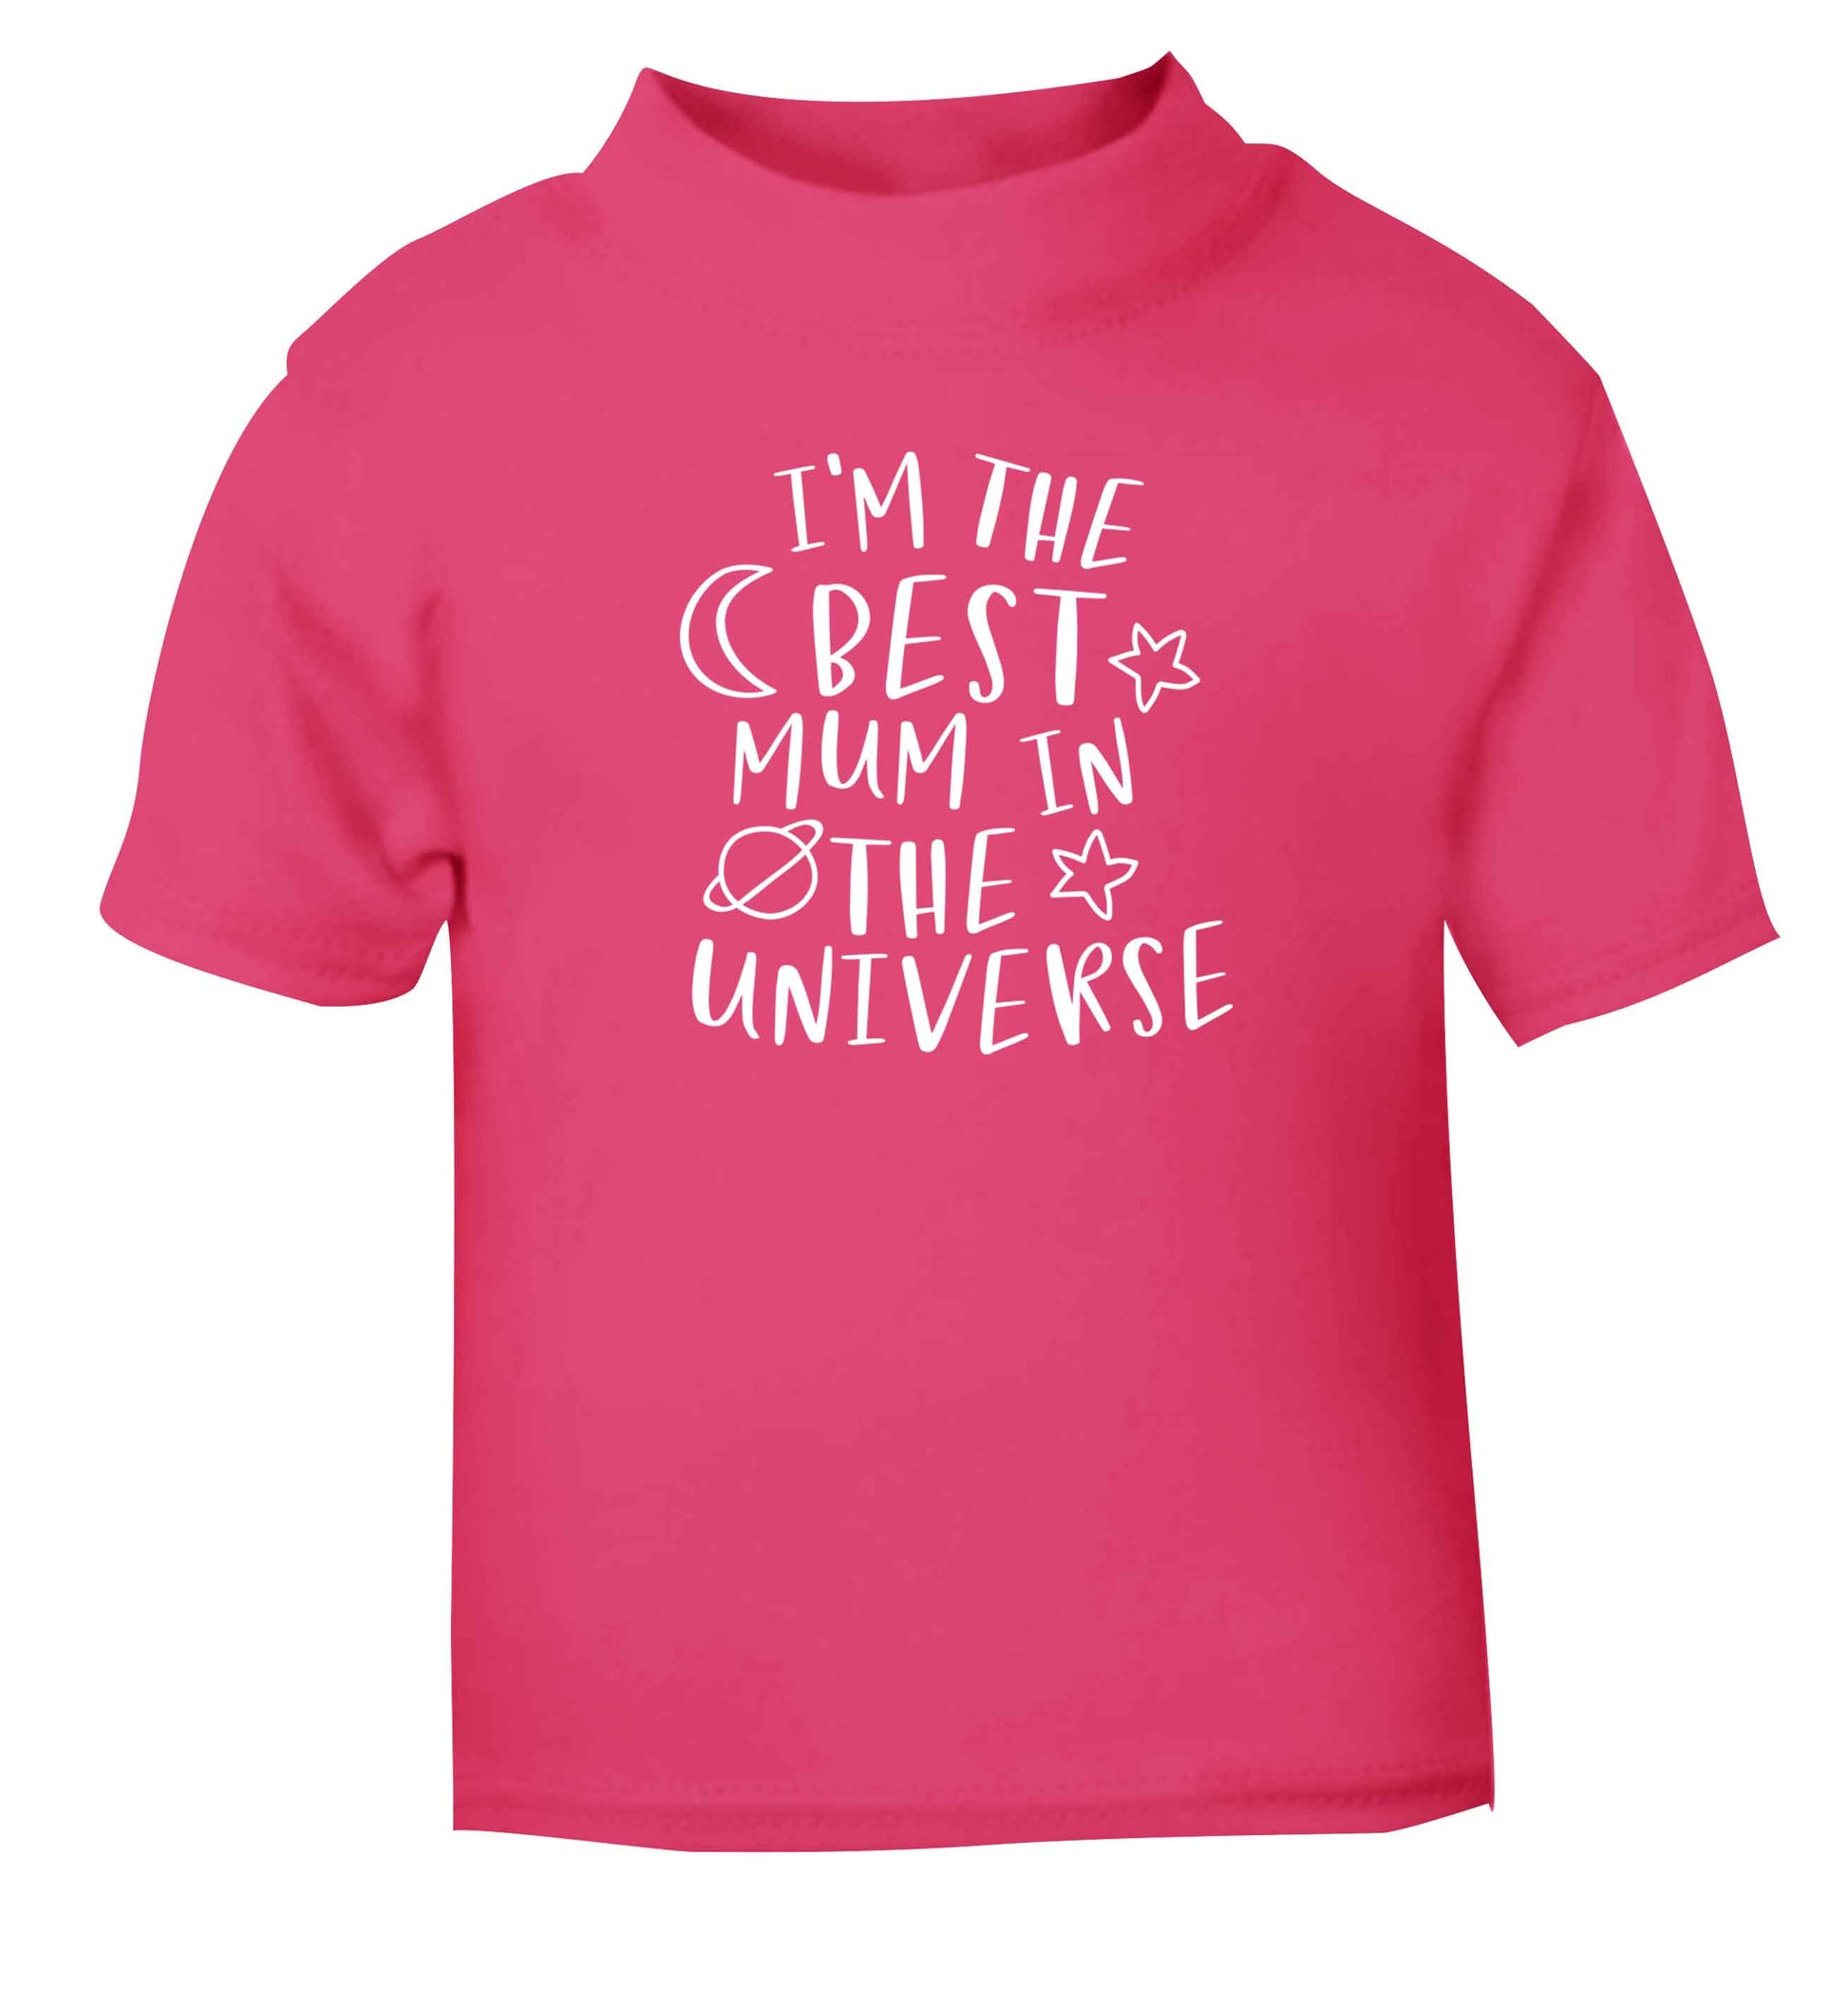 I'm the best mum in the universe pink baby toddler Tshirt 2 Years